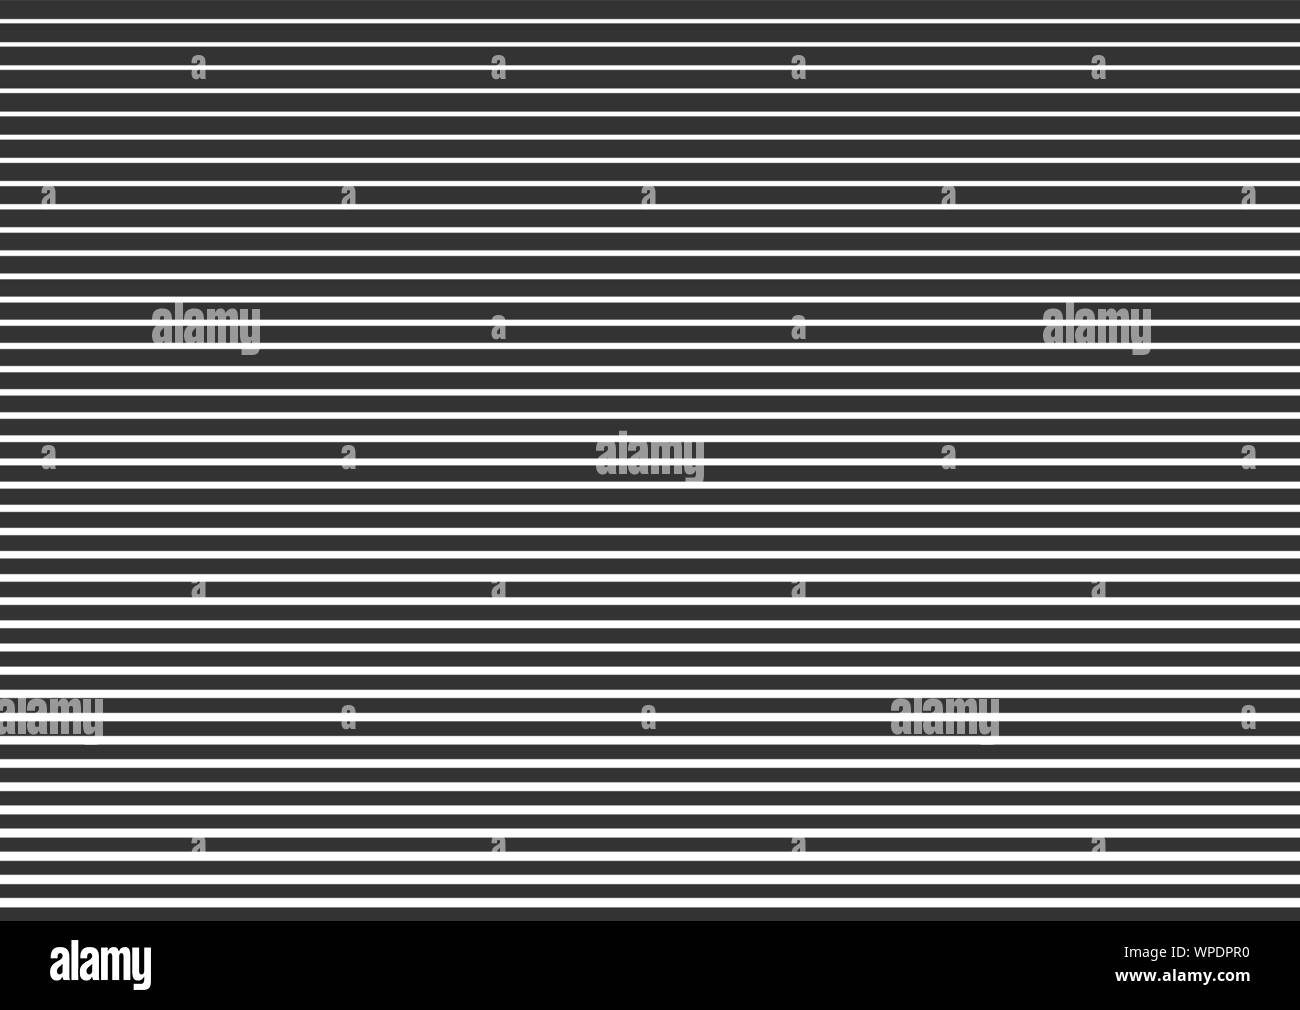 Black and White Line Pattern Vector Images (over 760,000)